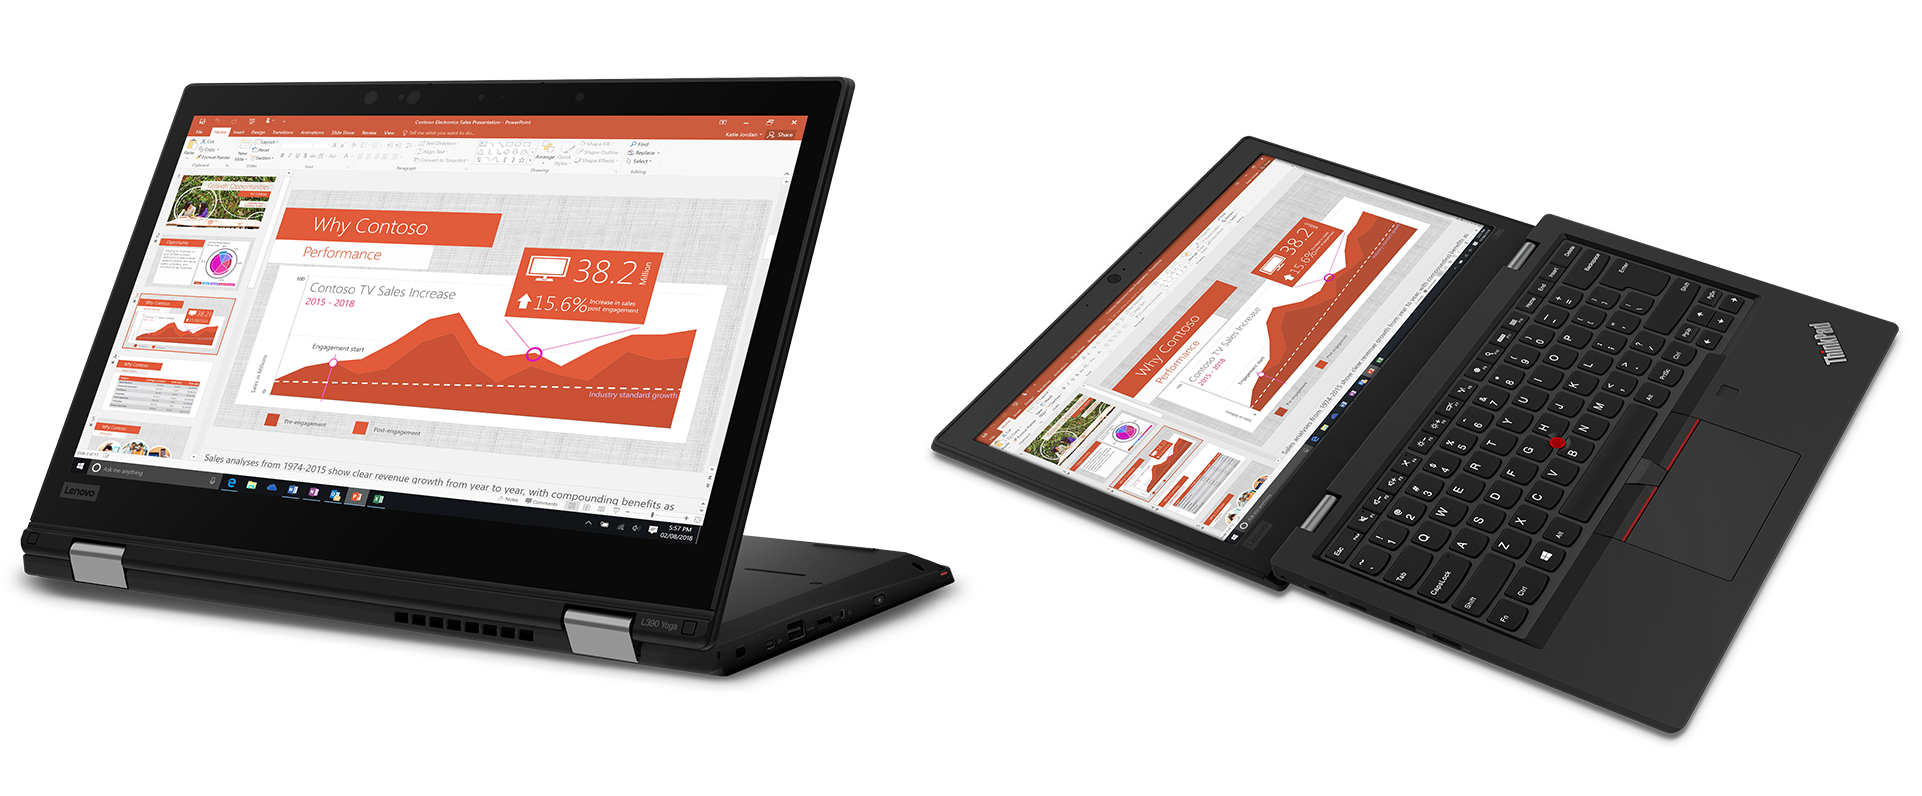 Lenovo Announces ThinkPad L390 and L390 Yoga Ready for Business Lenovo-side-by-side.png